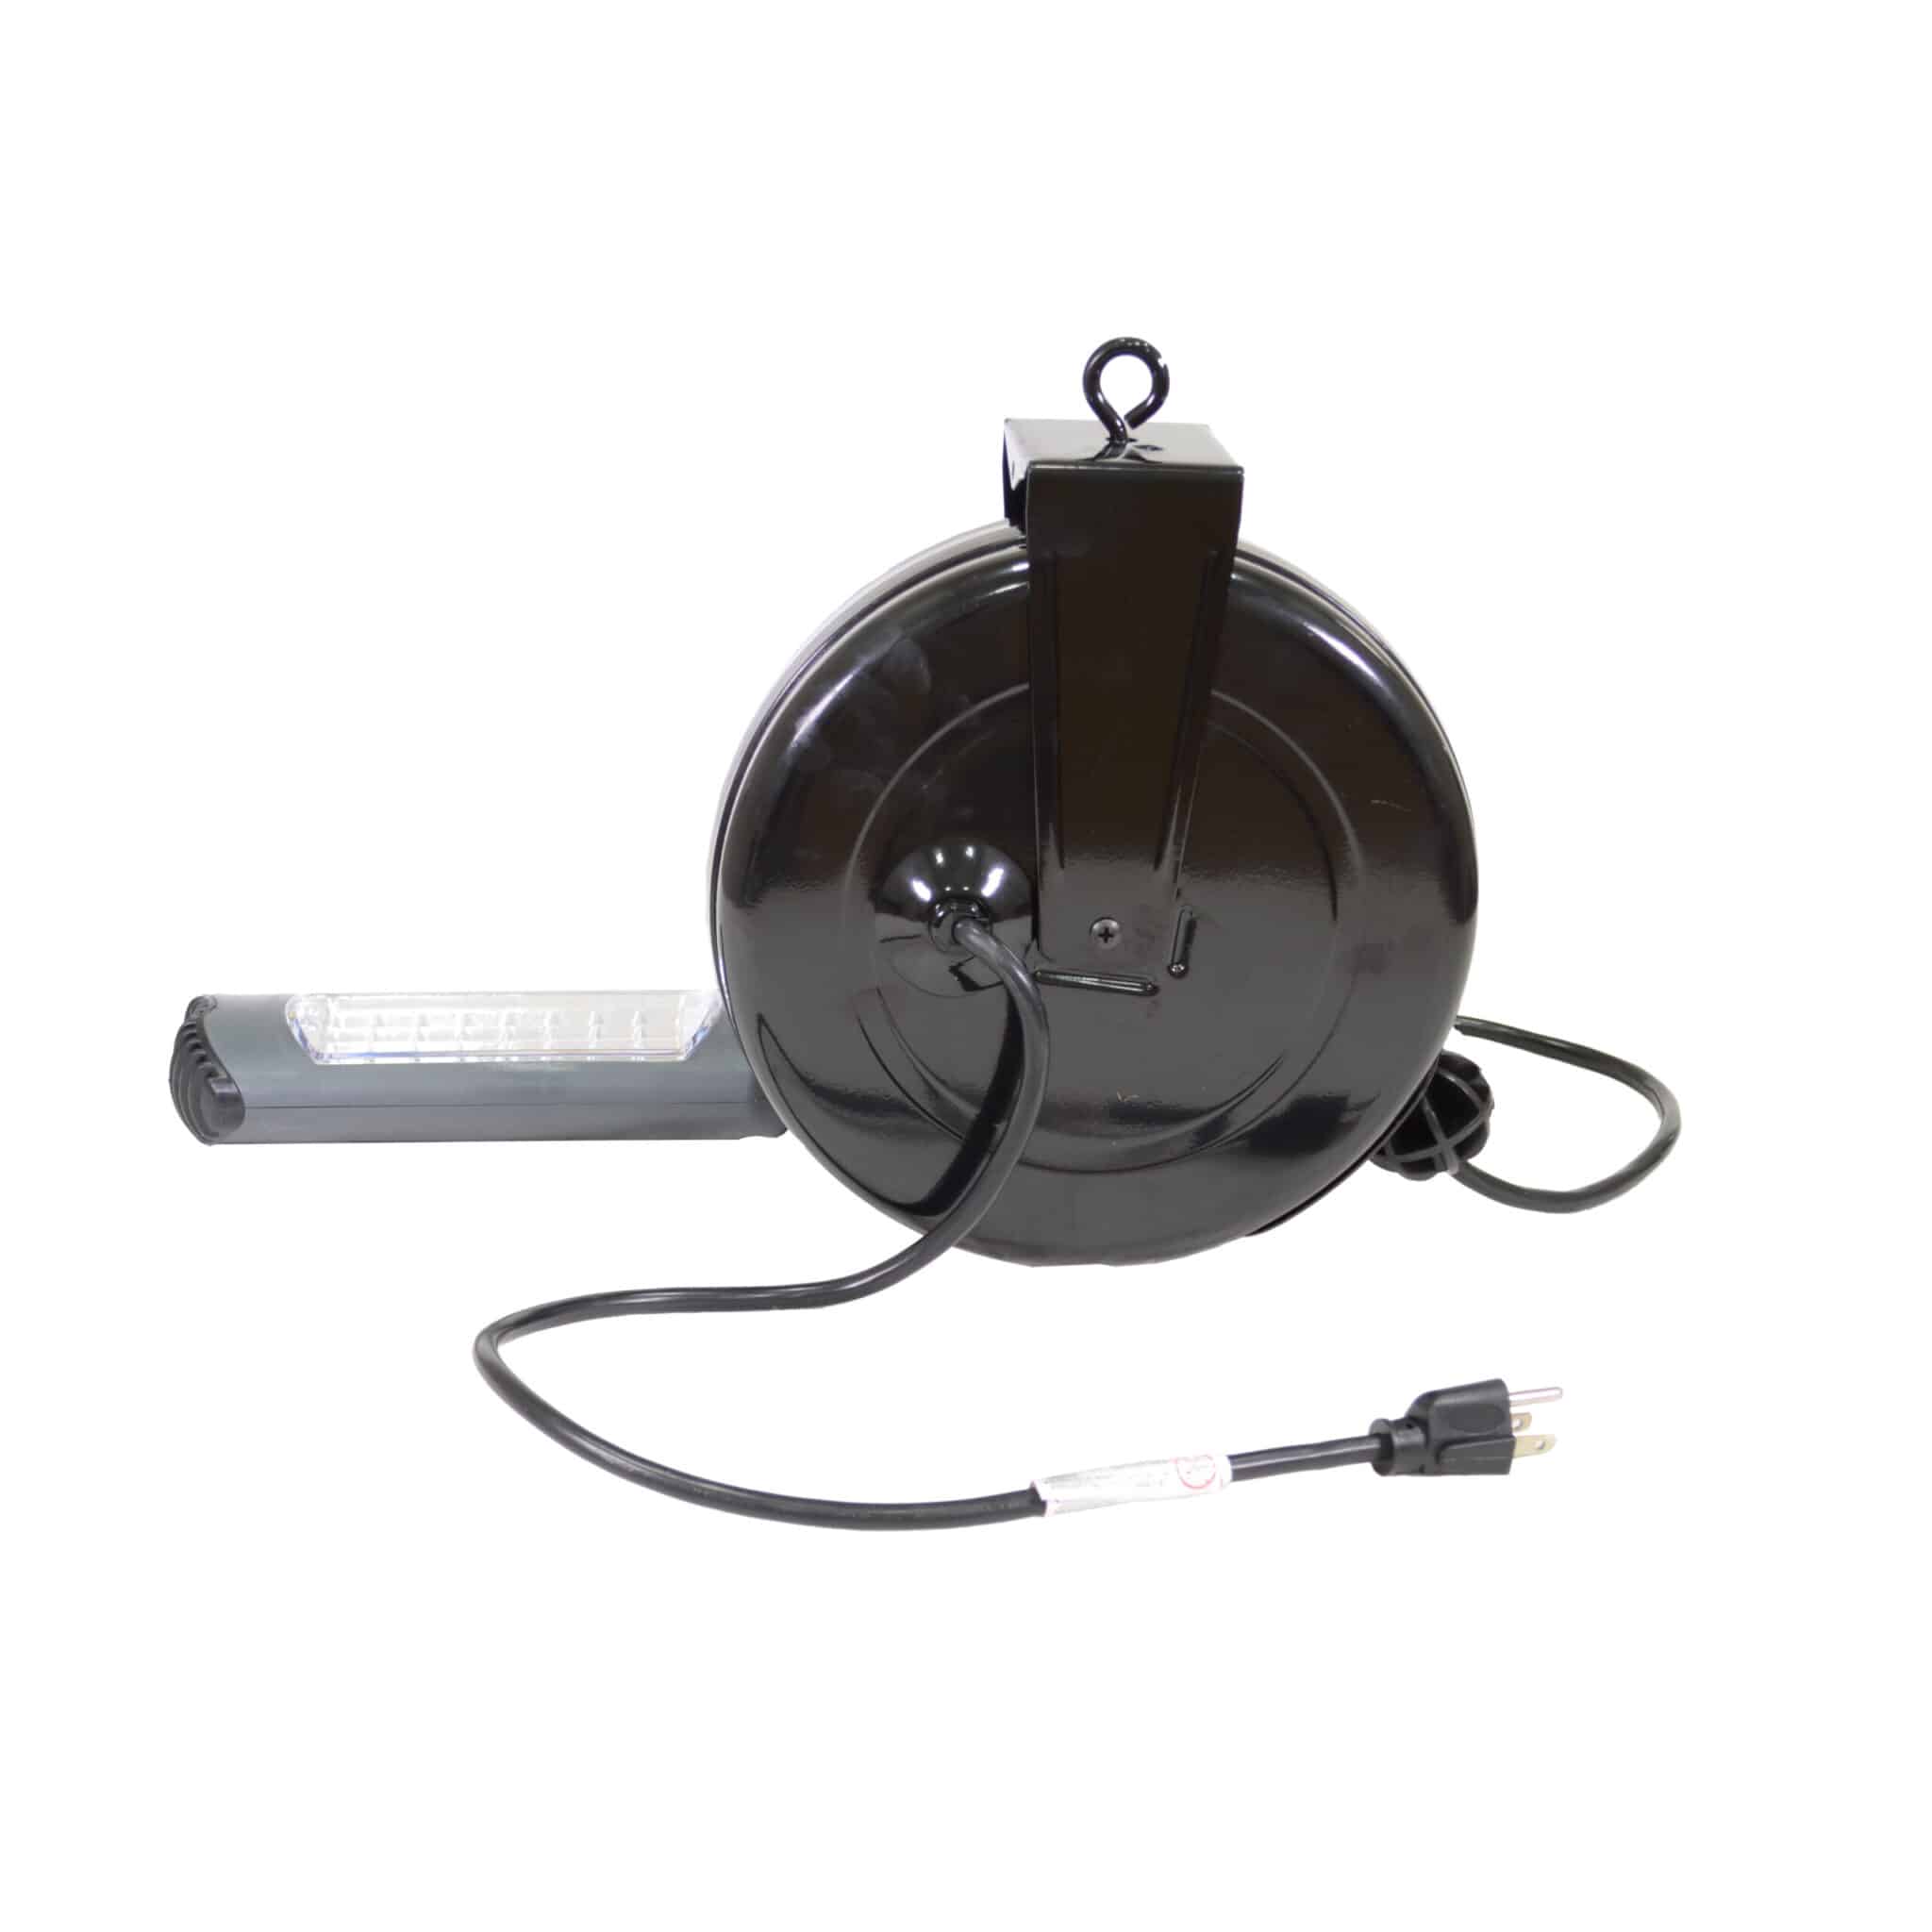 30' ProReel Retractable Cord Reel with Light - 5030AS